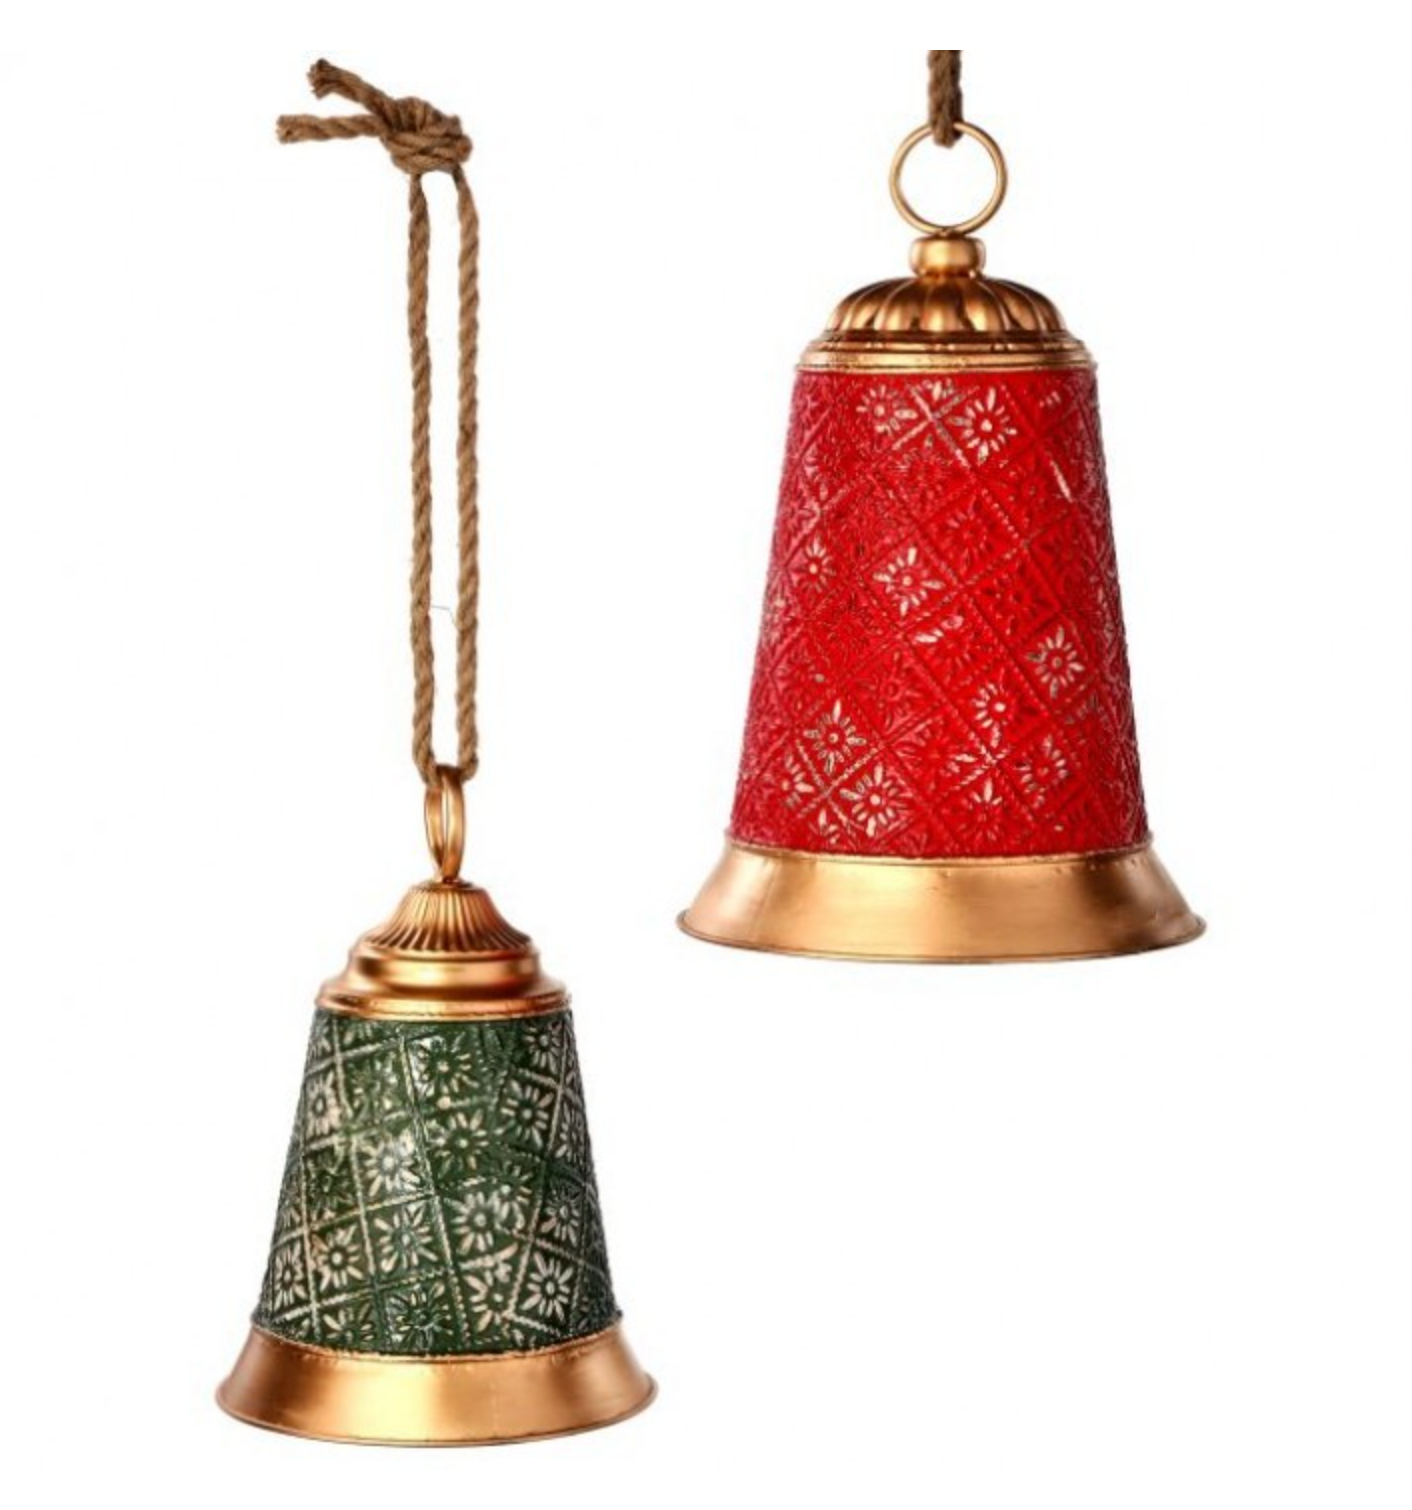 12-17" METAL ANTIQUE BELL W/ROPE 2PC SET